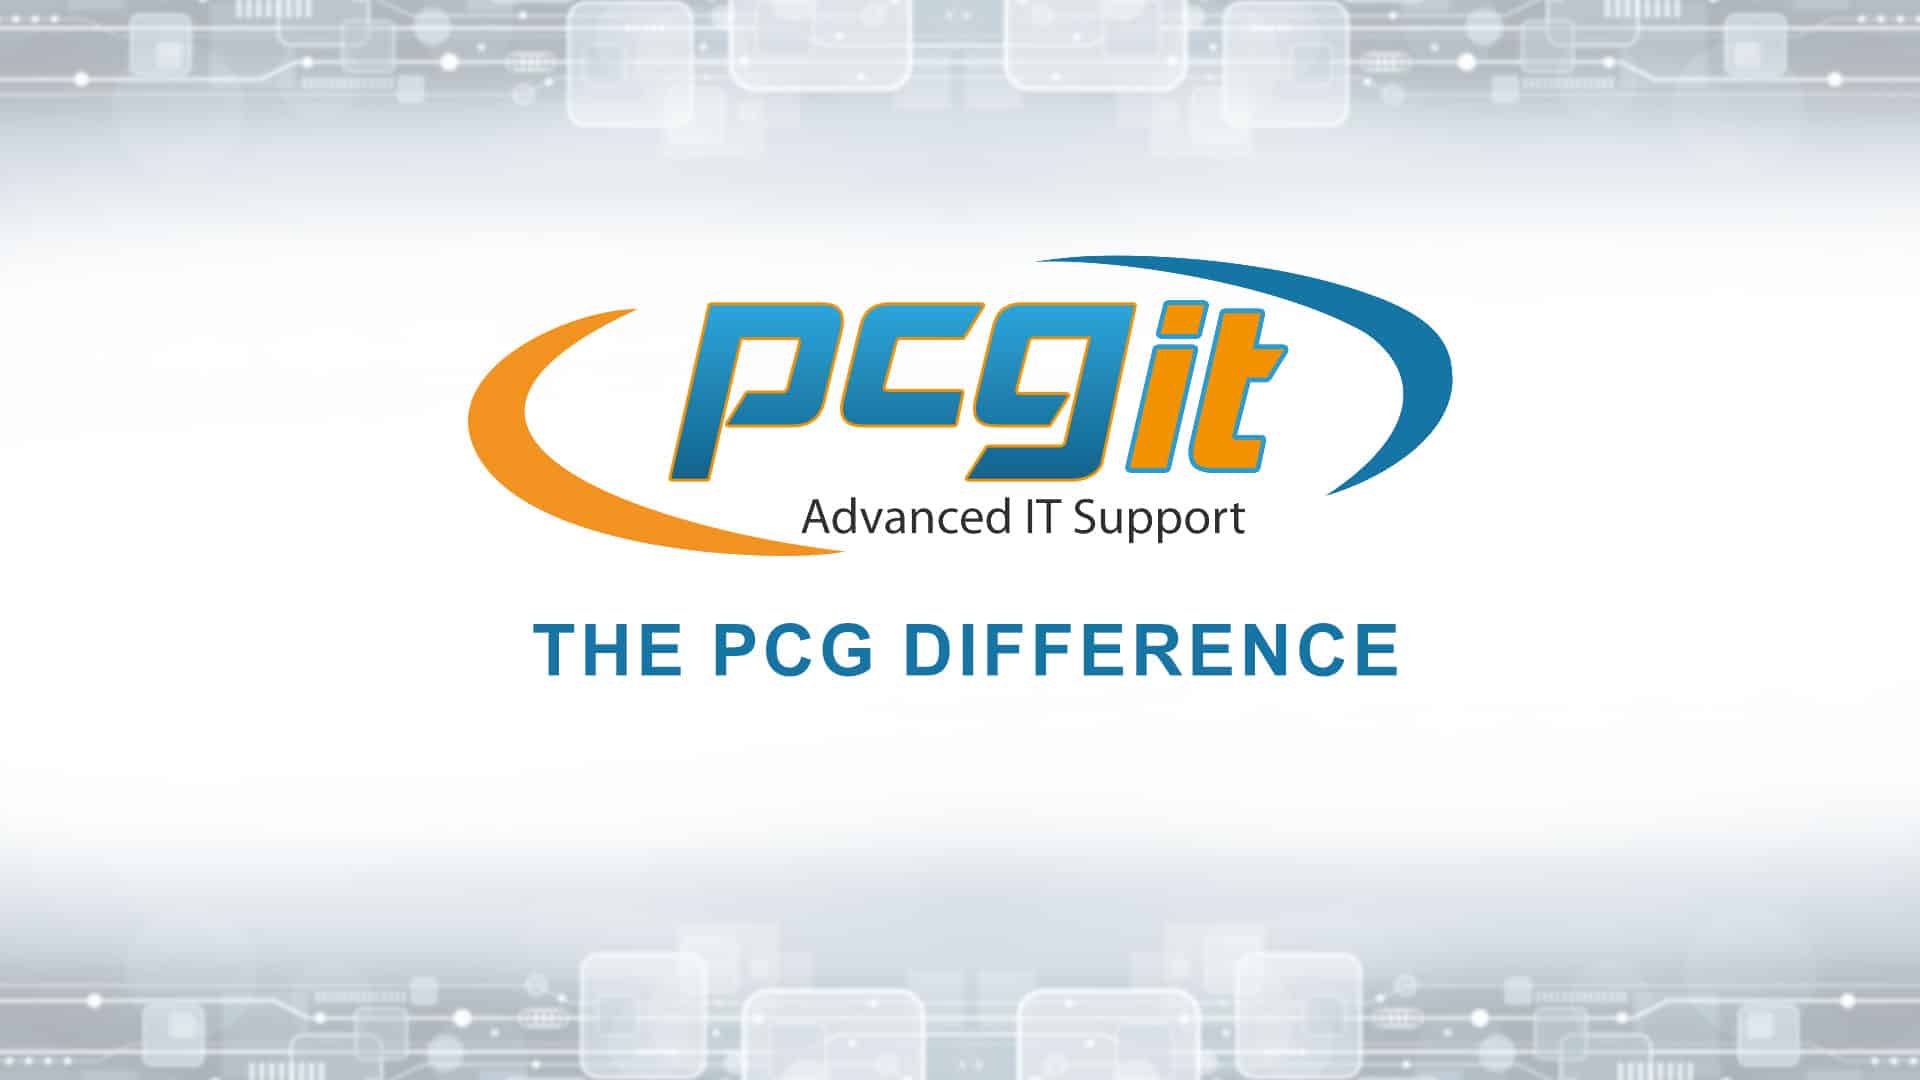 The PCG Difference